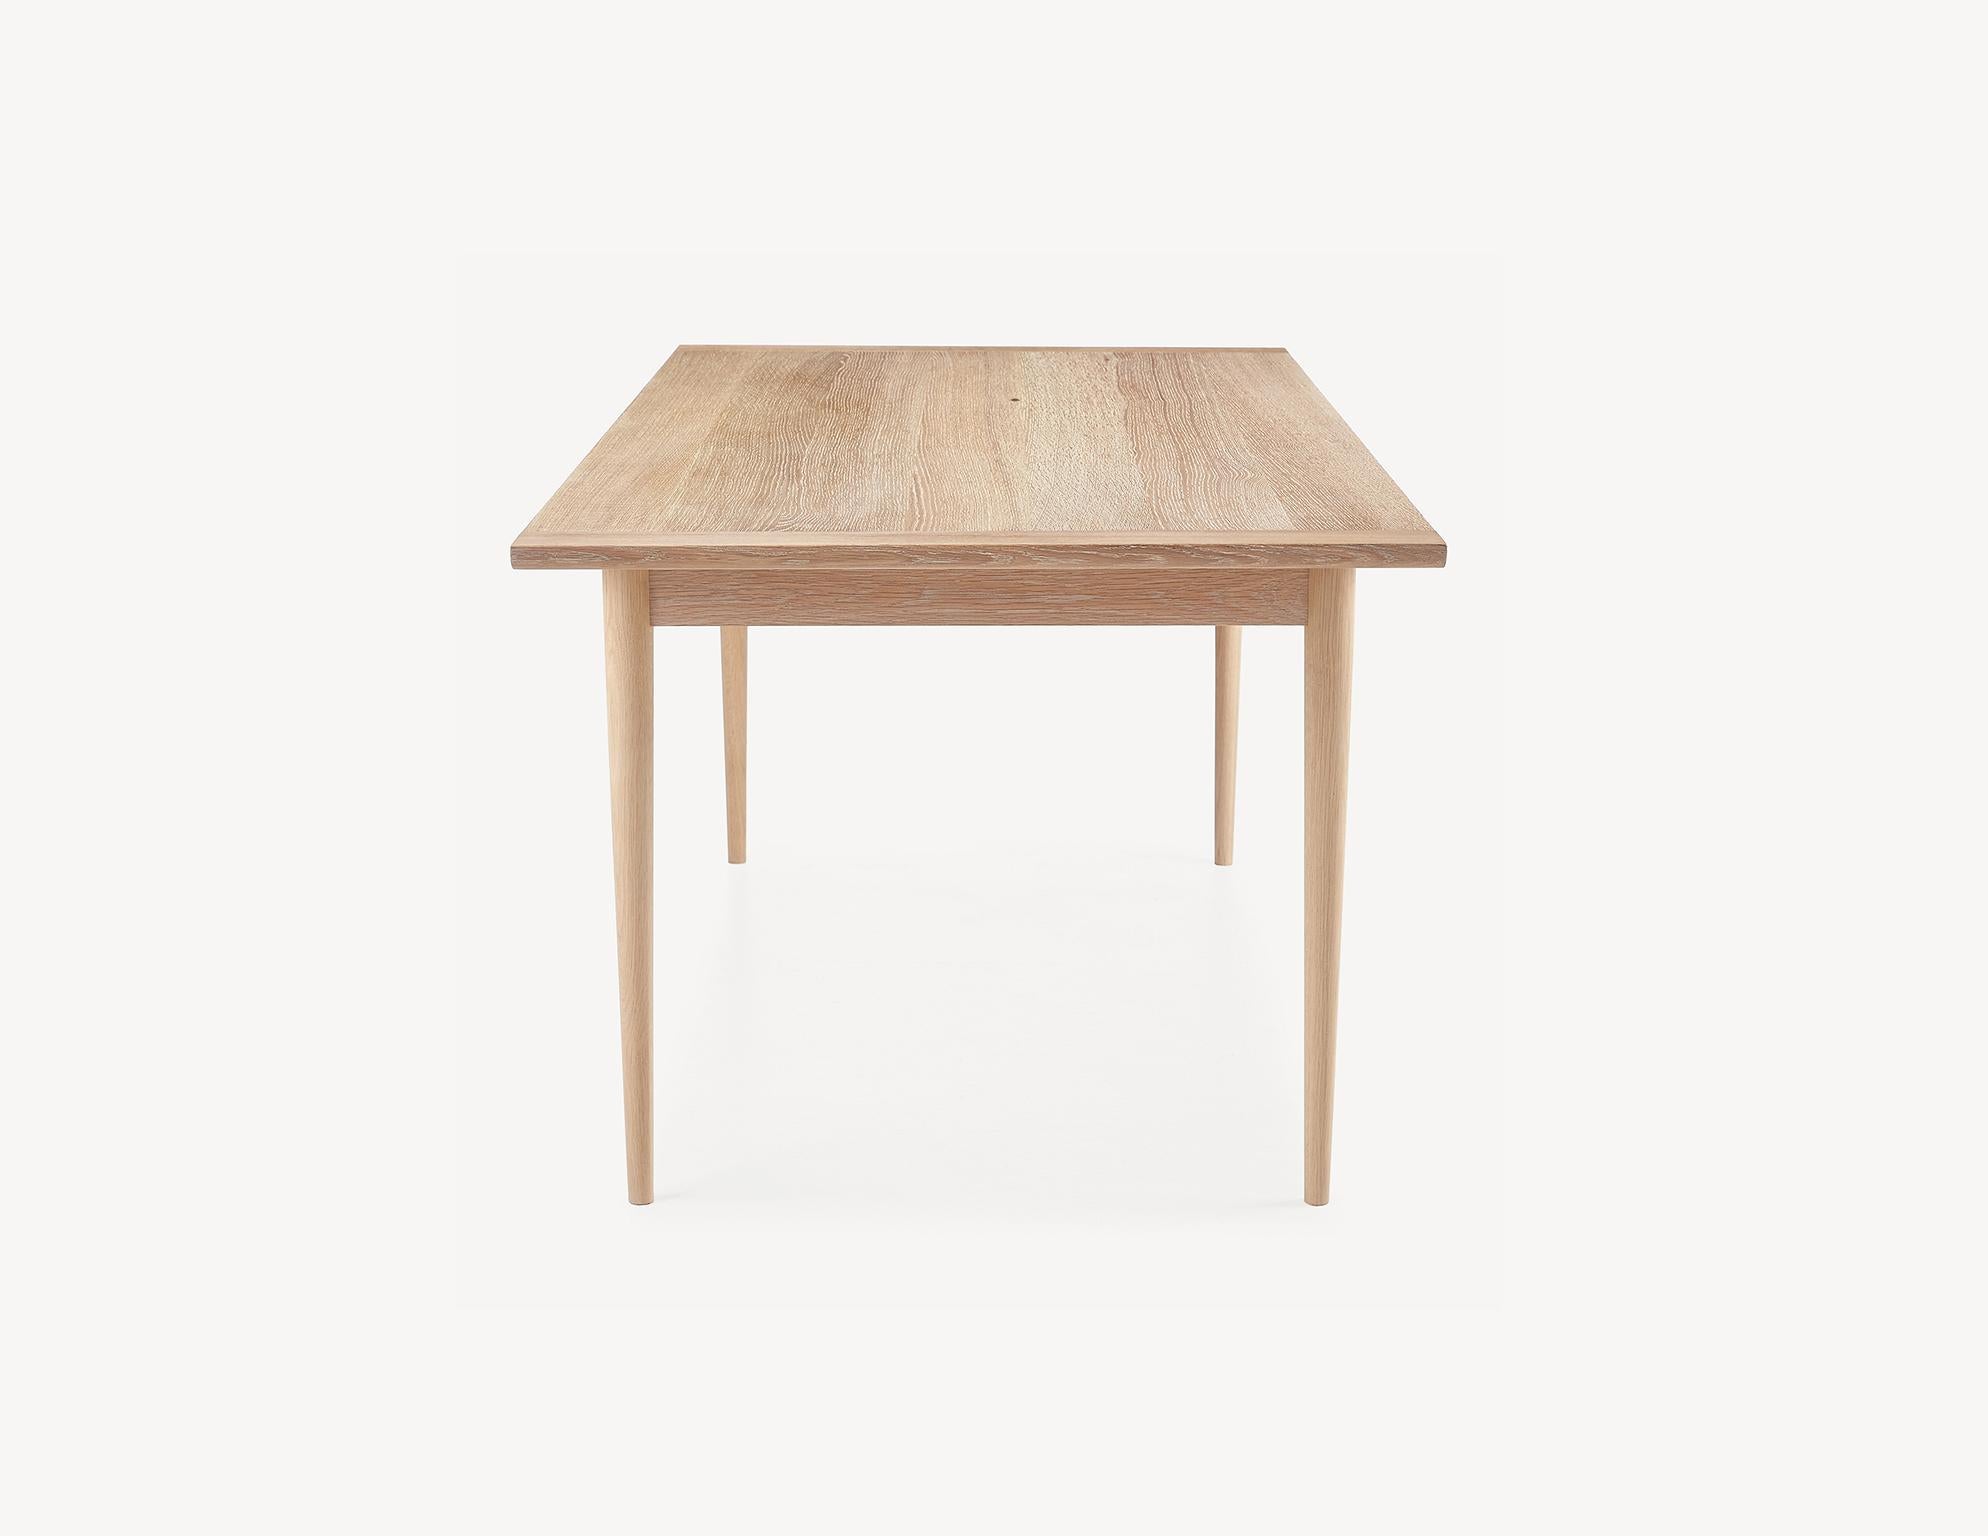 Carefully selected materials and refined proportions give the Lakeshore table an elegant, rational quality. Brass-pinned breadboard ends and quarter sawn white oak top are centuries-old craft techniques employed to keep this solid wood top stabile